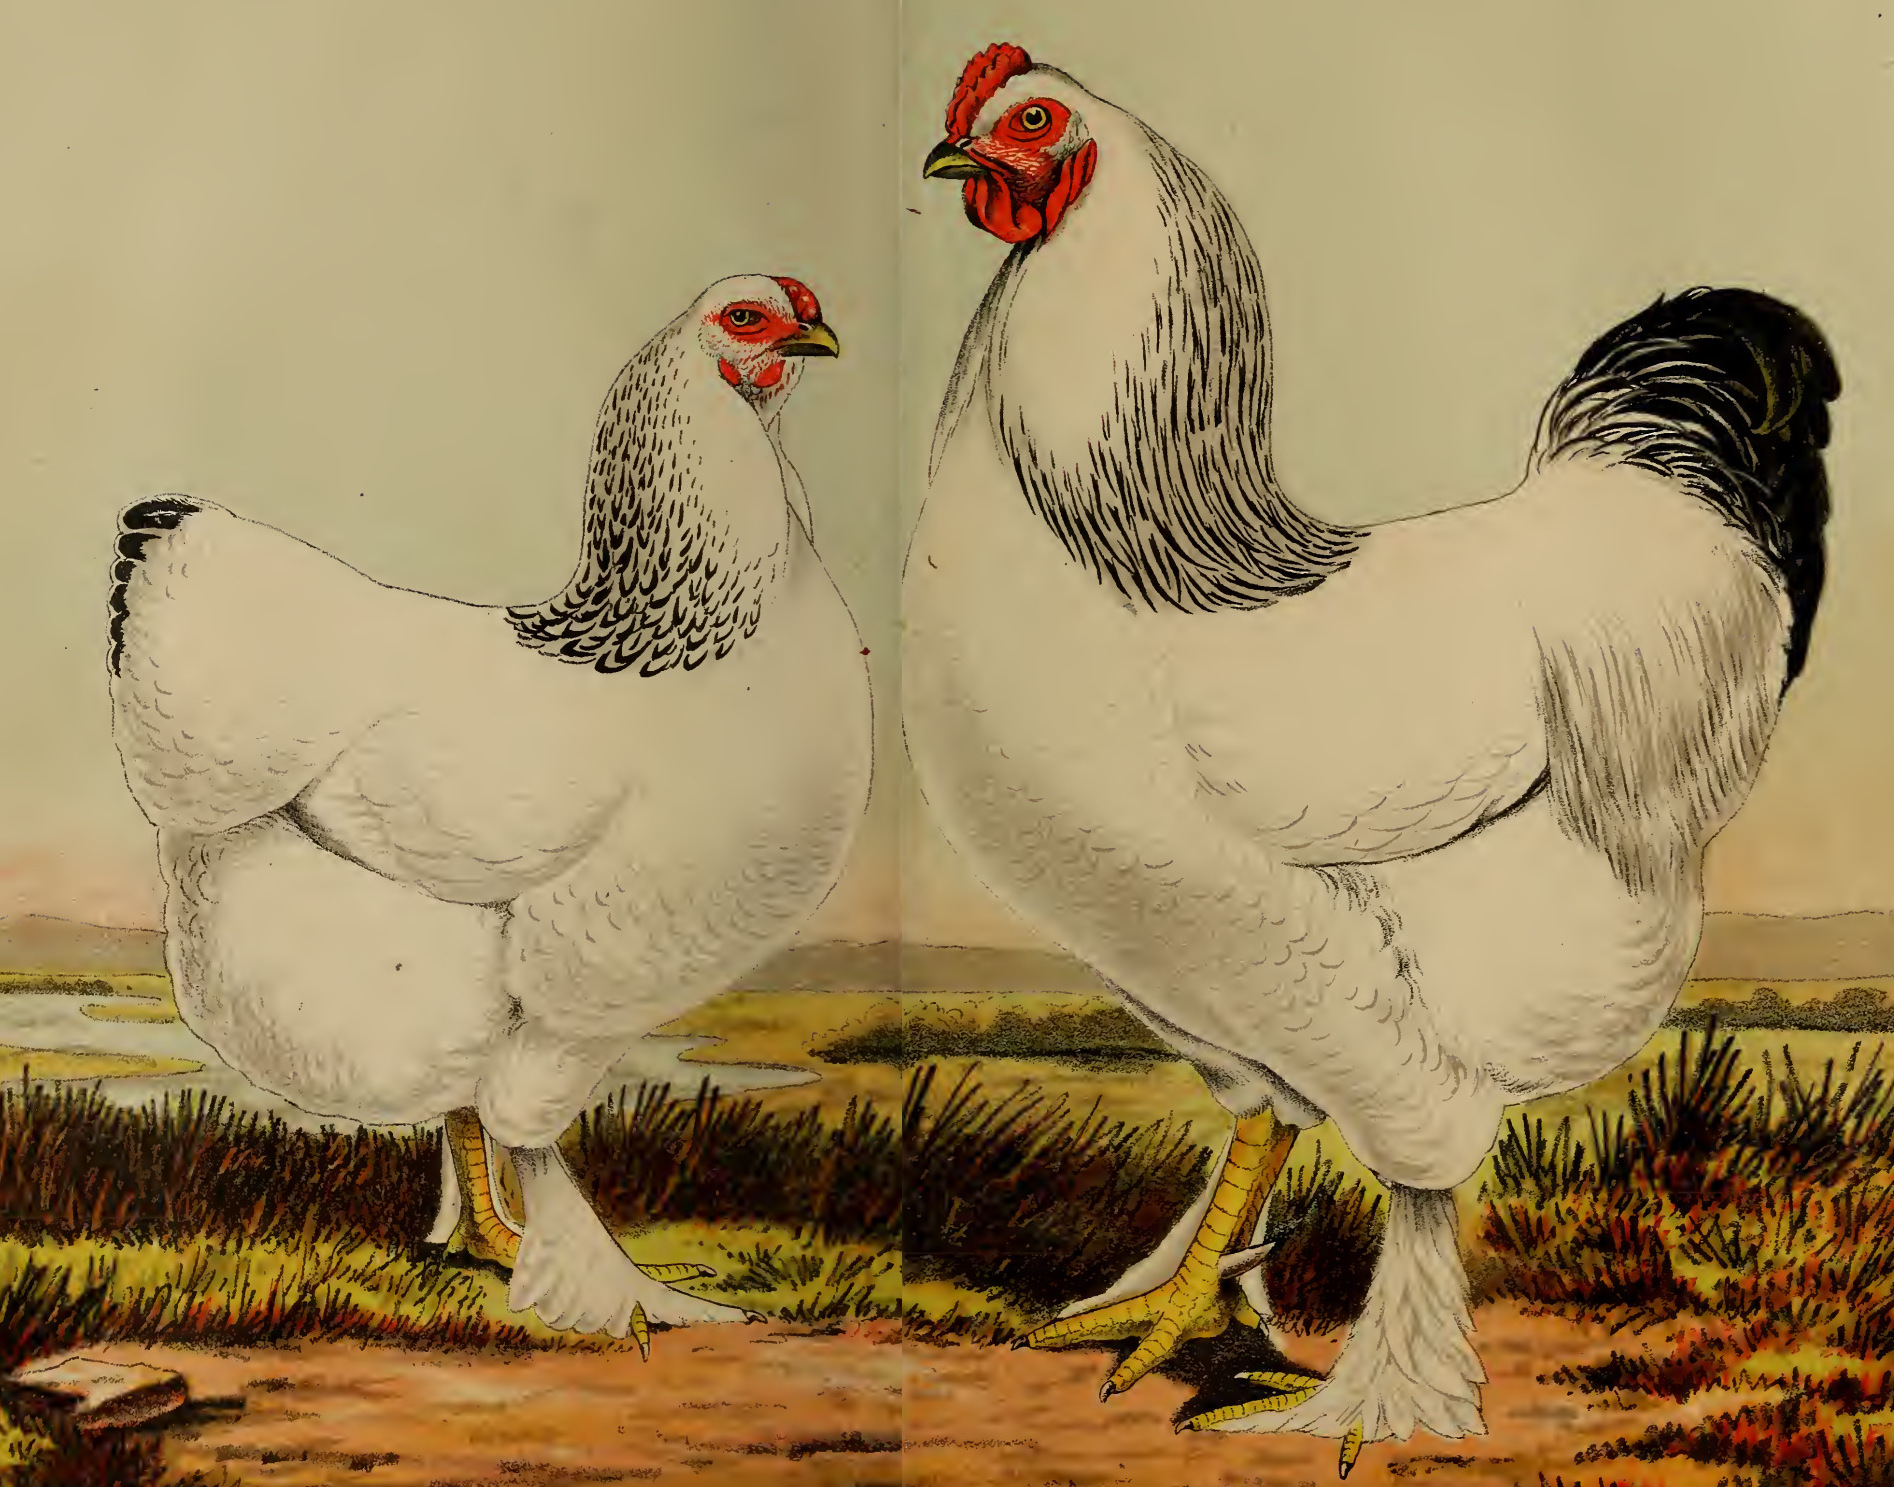 An artists drawing of the Brahma chickens from 1874